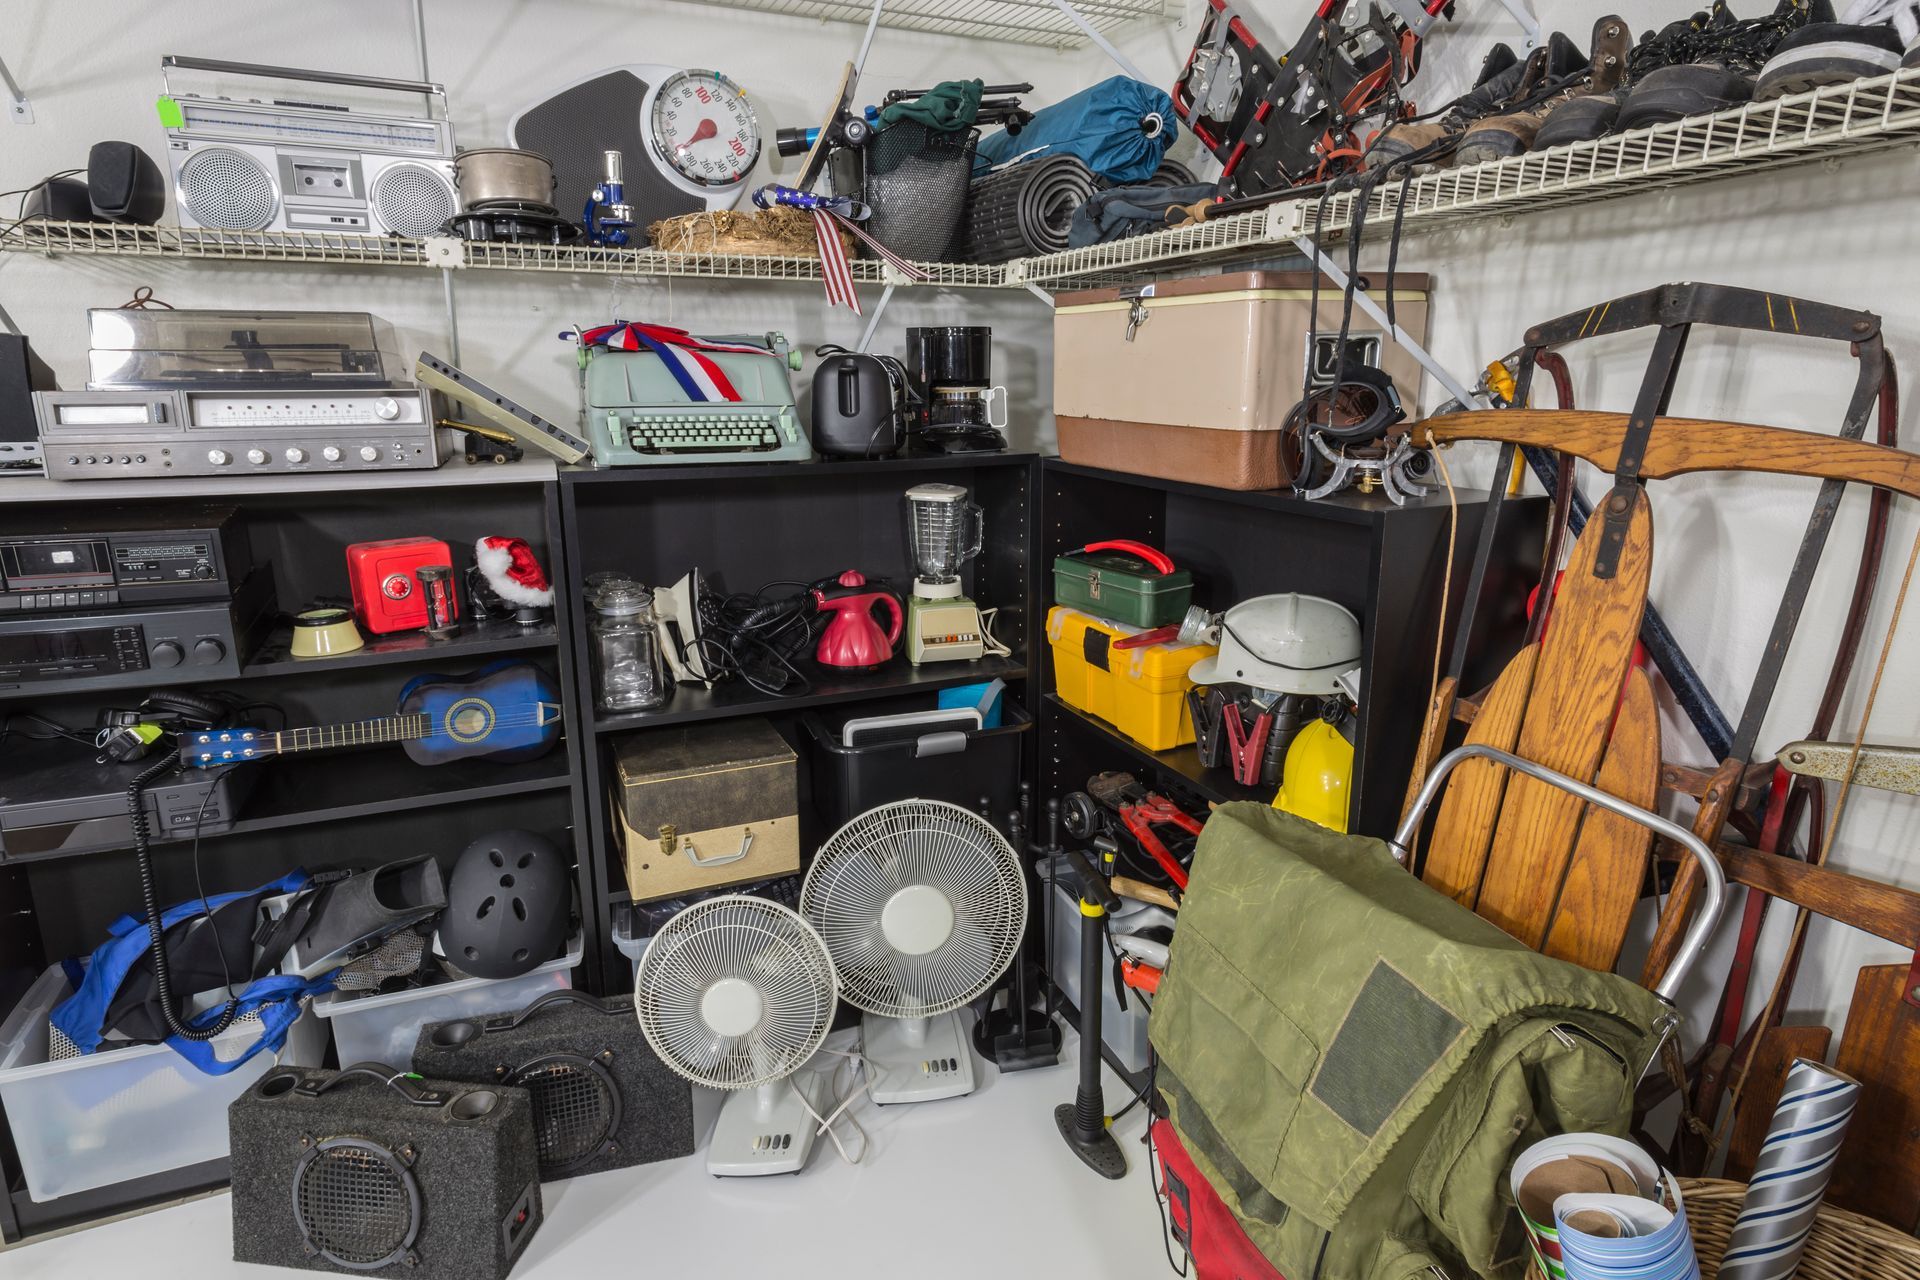 A garage filled with lots of junk and a green bag.